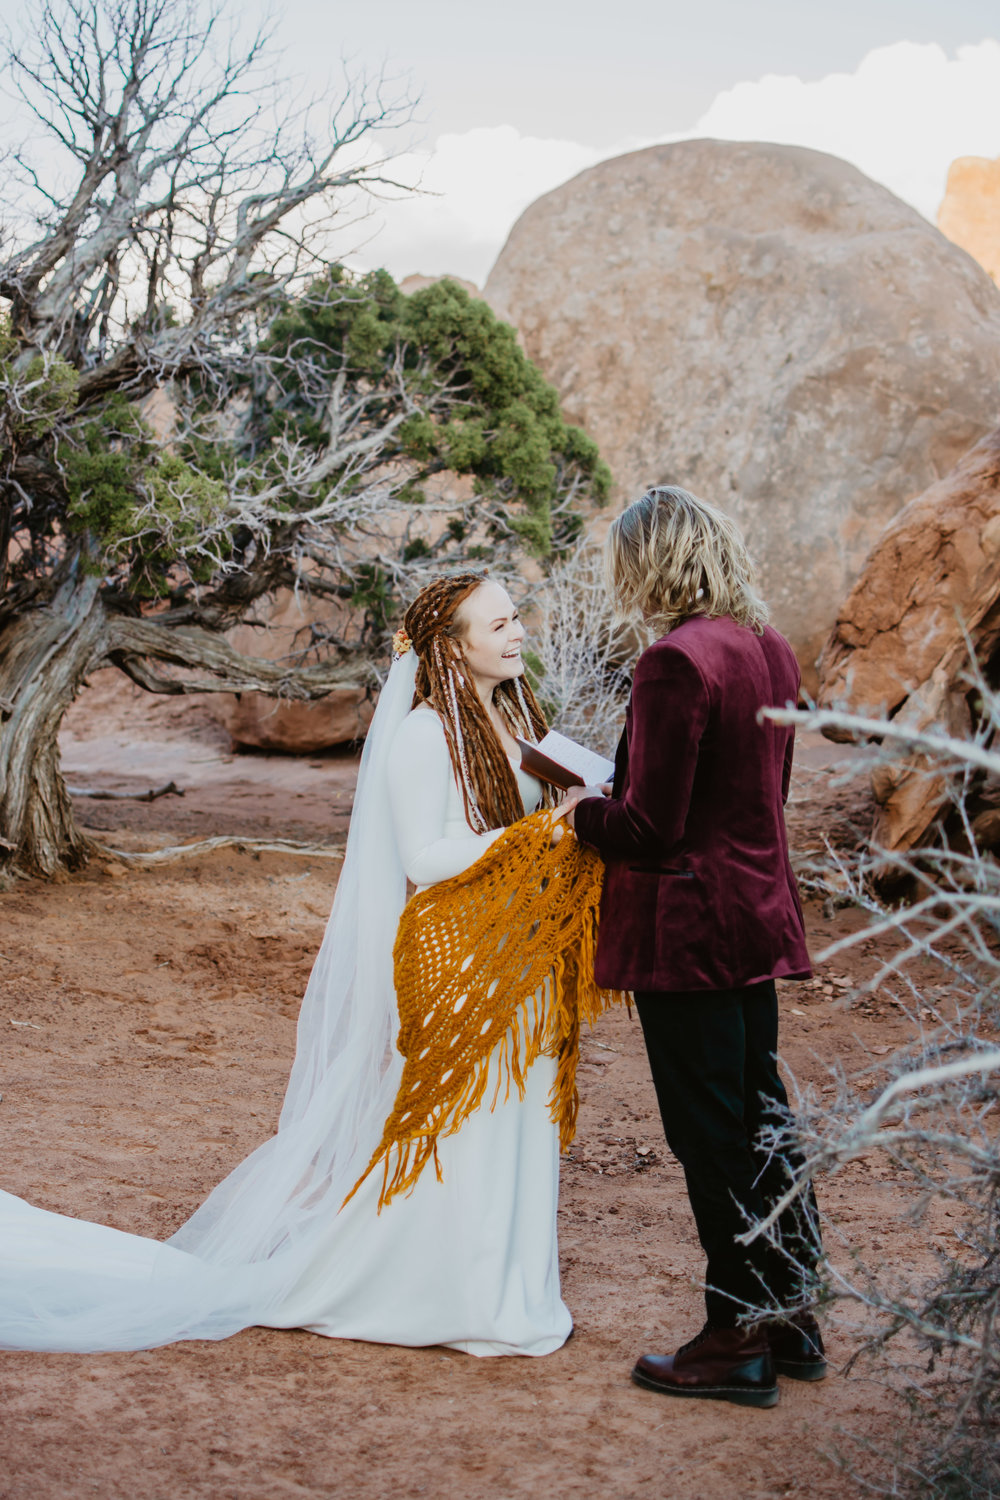 beautiful bride in dread locks and a simple white wedding dress with a burnt orange shaw smiles as her groom read his vows to her as they stand in the desert in Utah on their wedding day Jocilyn Bennett Photography | How to Plan an Elopement | Why Elope | Reasons to Elope | Destination Wedding Photographer | Utah Wedding Photographer | Adventure Photographer | Destination Elopement Photographer | Traveling Photographer | Arches National Park | Arches National Park Elopement | Southern Utah Elopement | Boho Bride | Bride with dreads |